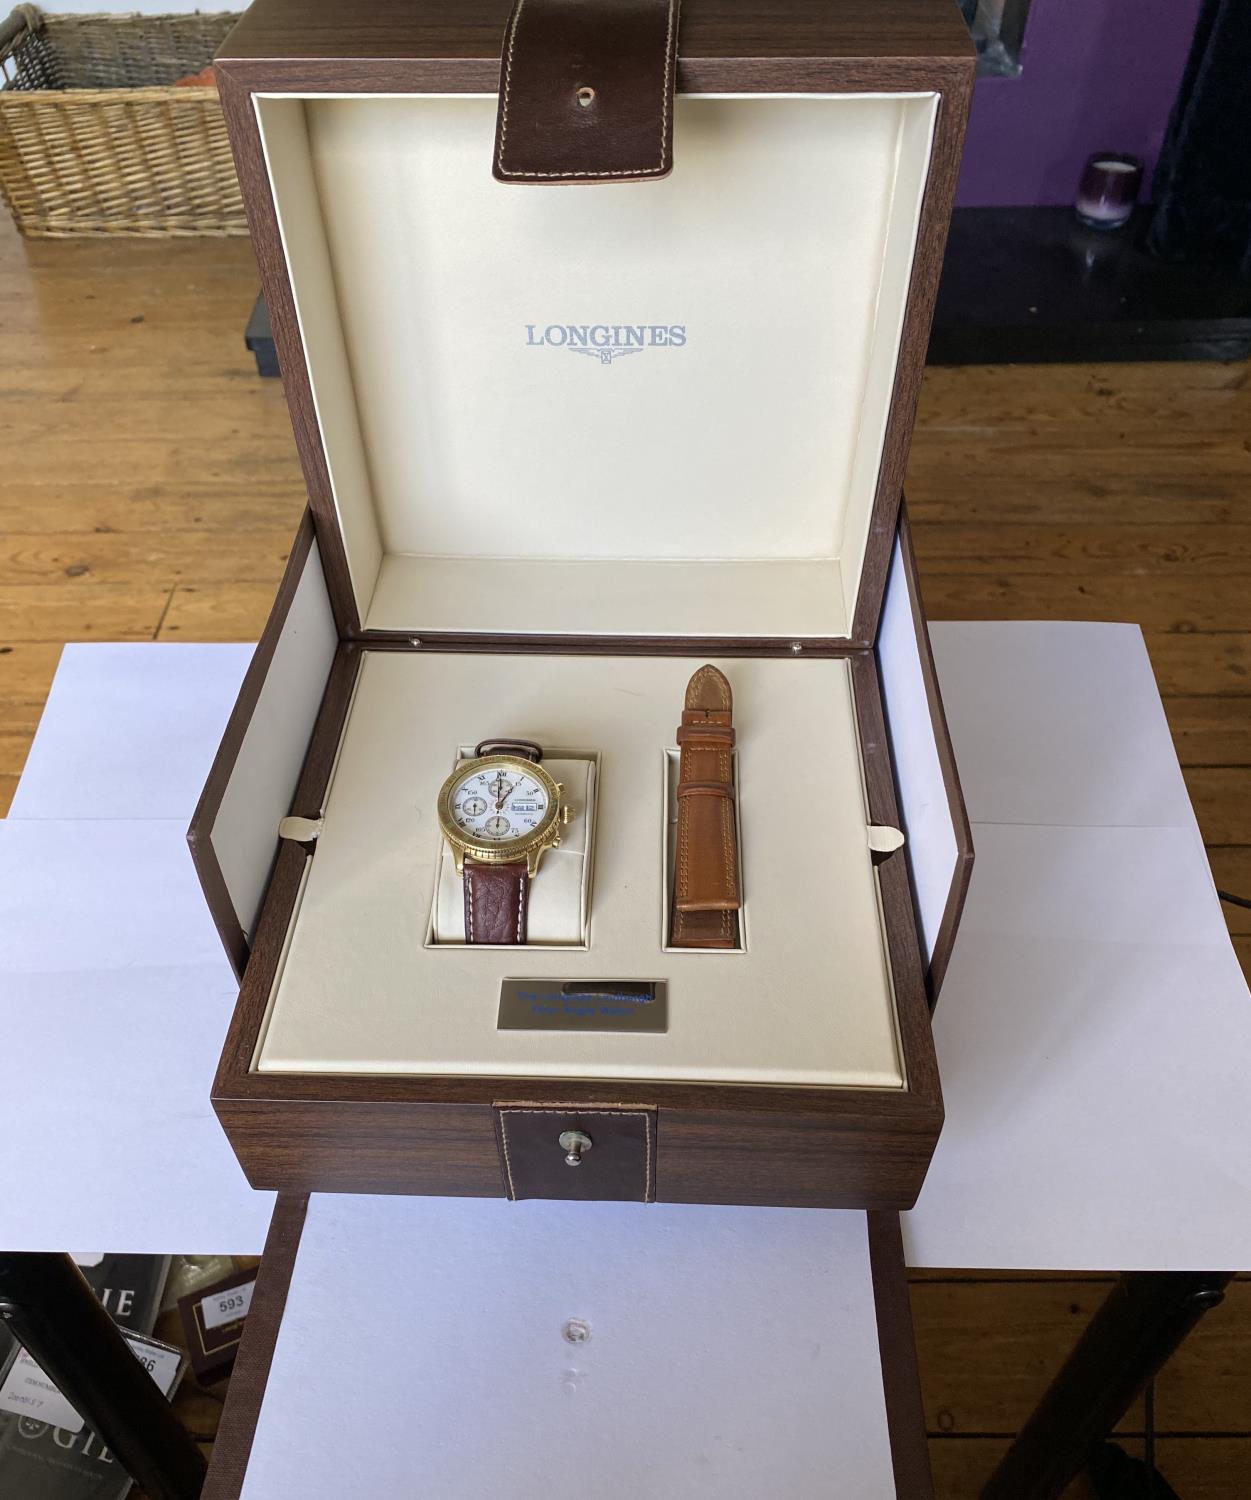 A LONGINES LINDEBERGH HOUR ANGLE WRIST WATCH WITH SOLID YELLOW GOLD CASE AND BEZEL, AUTOMATIC